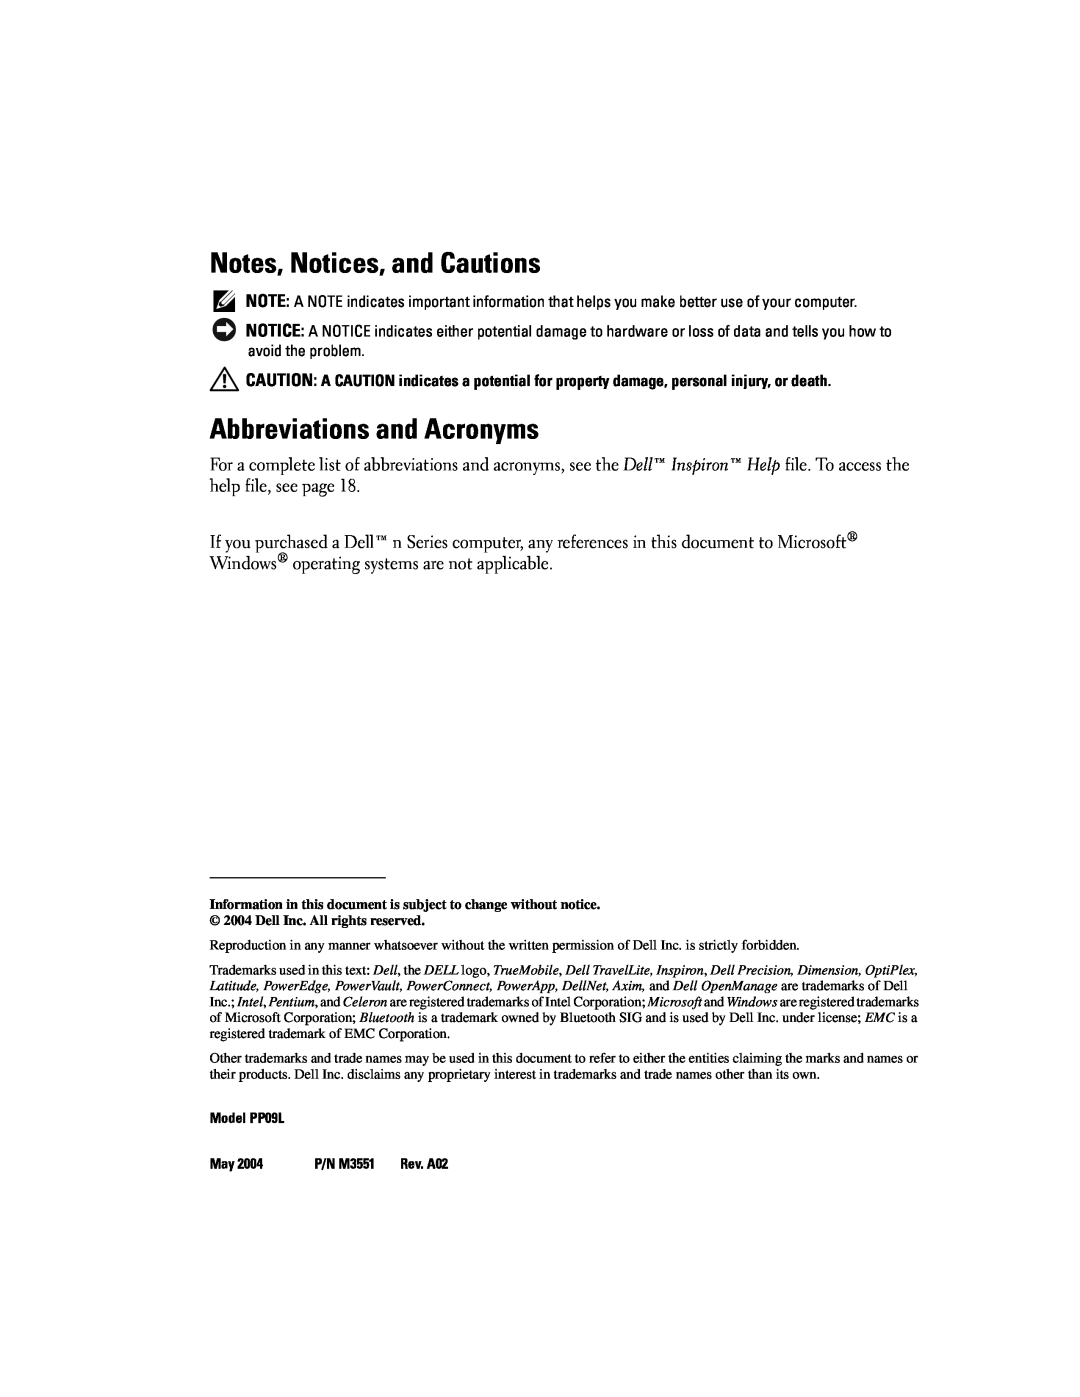 Dell owner manual Notes, Notices, and Cautions, Abbreviations and Acronyms, Model PP09L, P/N M3551 Rev. A02 